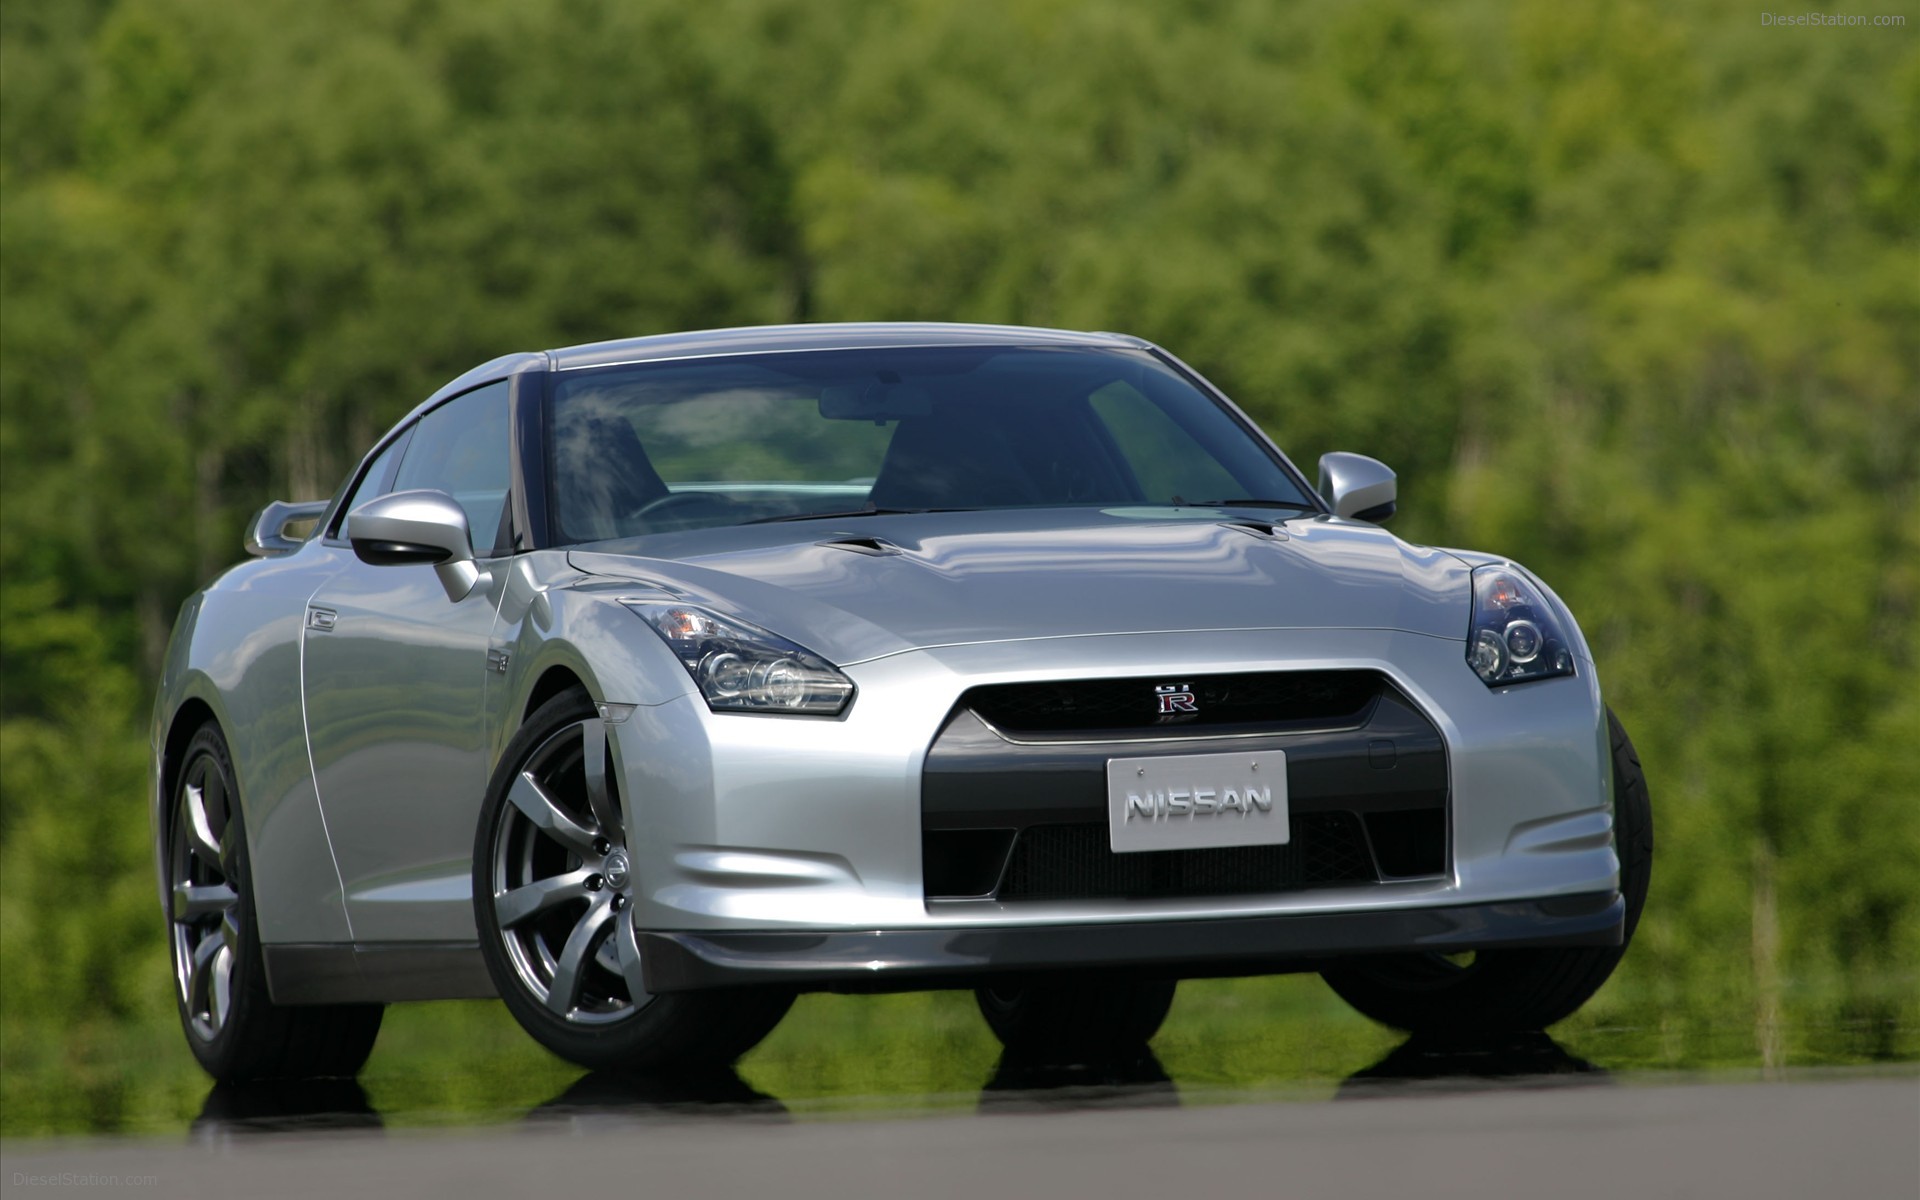 Nissan Gt R Widescreen Exotic Car Pictures Of